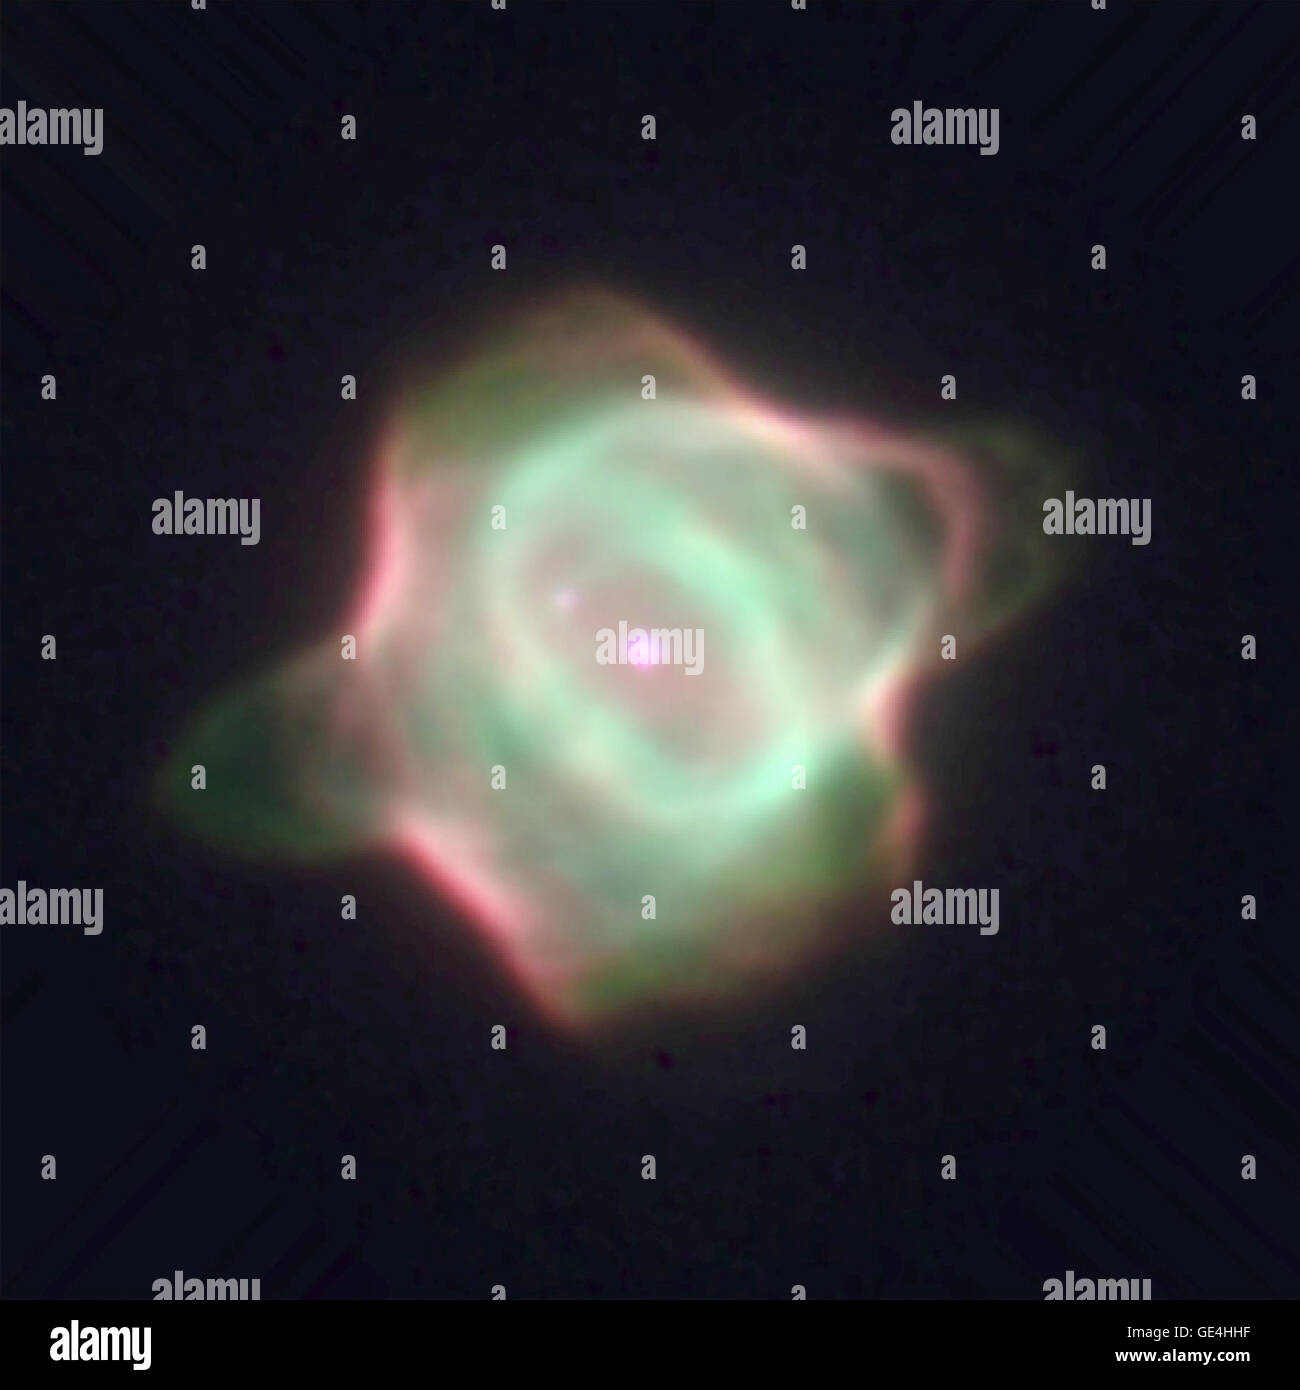 (March 1, 1996) This Wide Field and Planetary Camera 2 image captures the infancy of the Stingray nebula (Hen-1357), the youngest known planetary nebula. In this image, the bright central star is in the middle of the green ring of gas. Its companion star is diagonally above it at 10 o'clock. A spur of gas (green) is forming a faint bridge to the companion star due to gravitational attraction. The image also shows a ring of gas (green) surrounding the central star, with bubbles of gas to the lower left and upper right of the ring. The wind of material propelled by radiation from the hot central Stock Photo